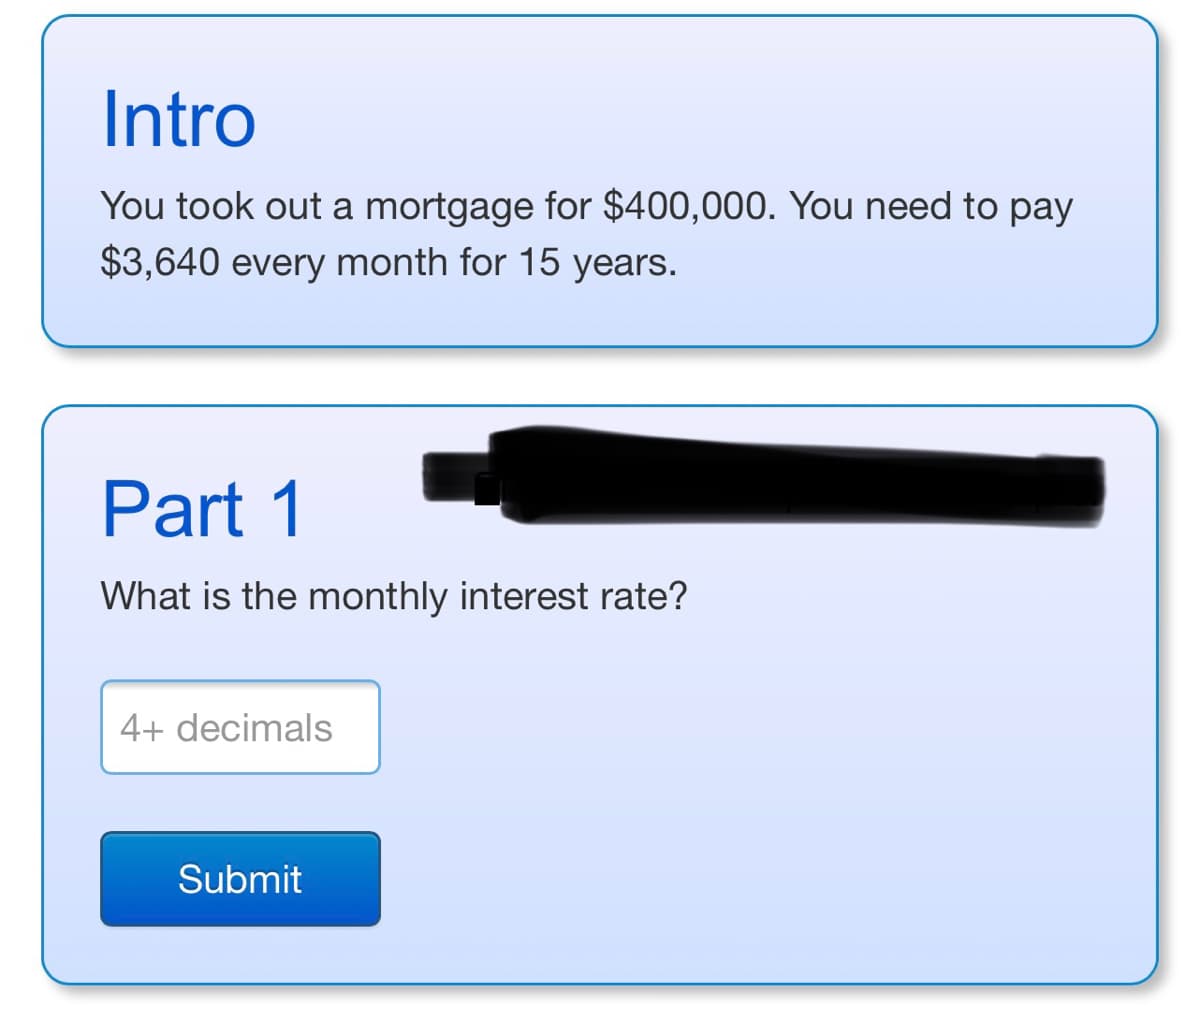 Intro
You took out a mortgage for $400,000. You need to pay
$3,640 every month for 15 years.
Part 1
What is the monthly interest rate?
4+ decimals
Submit